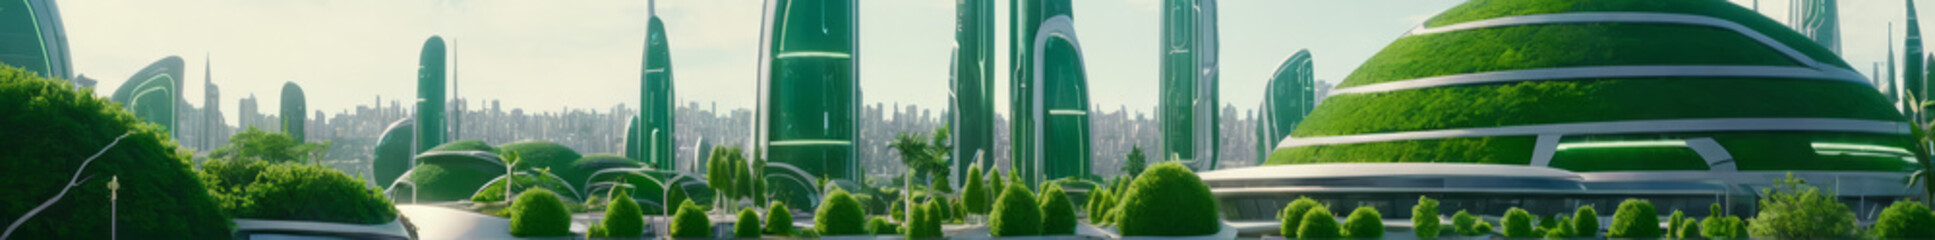 World earth day concept of a green futuristic city, eco city with plants and trees, futuristic sustainable city concept, sustainability, green planet, safe mother earth, website header, leaderboard